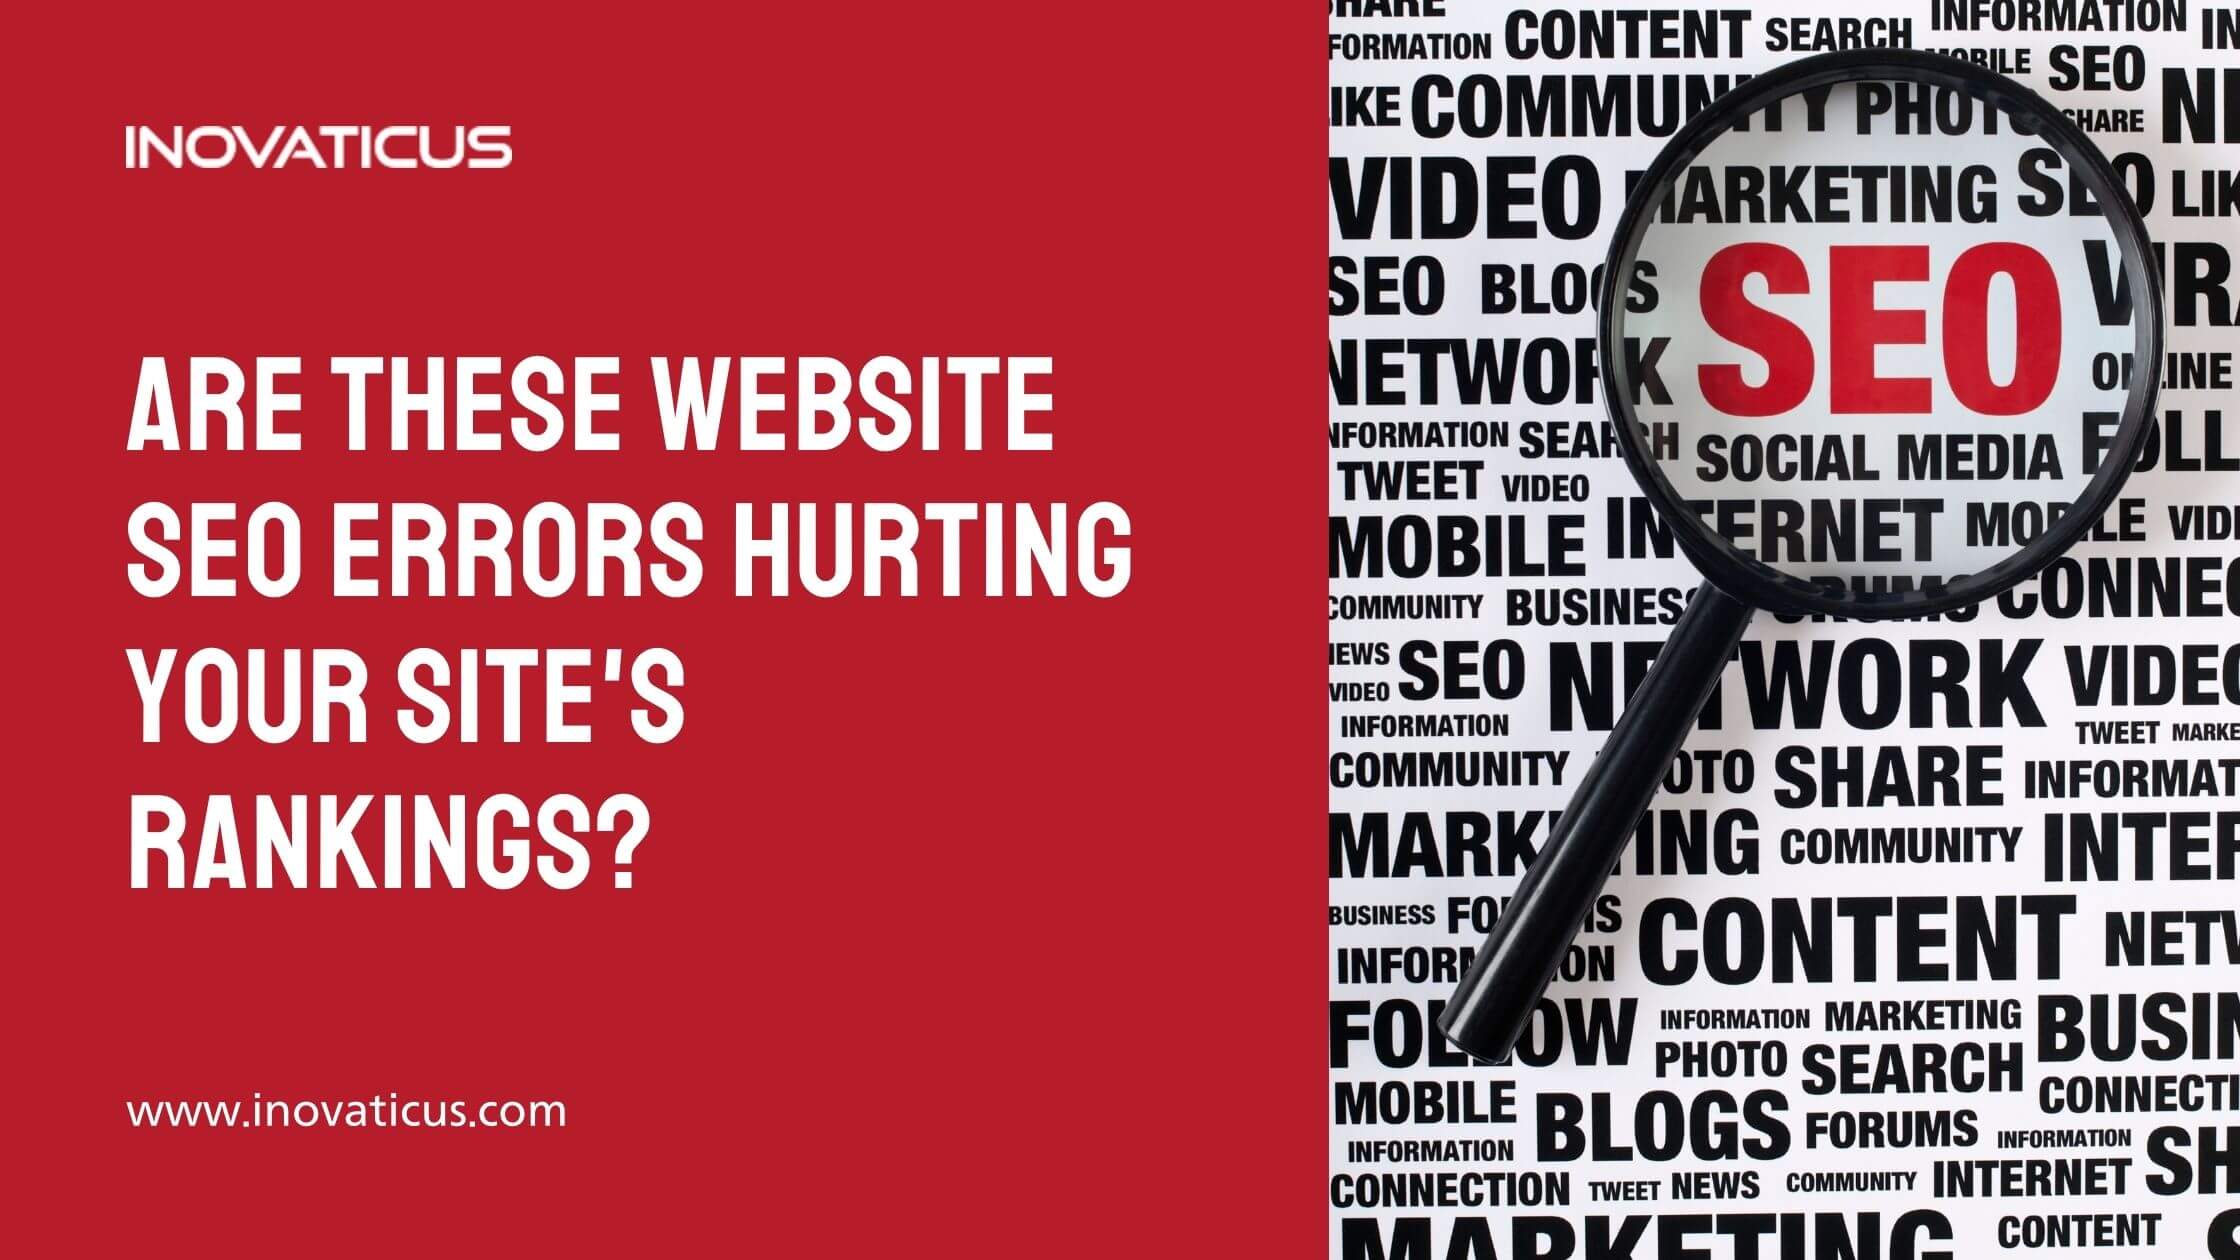 Are These Website SEO Errors Hurting Your Site's Rankings